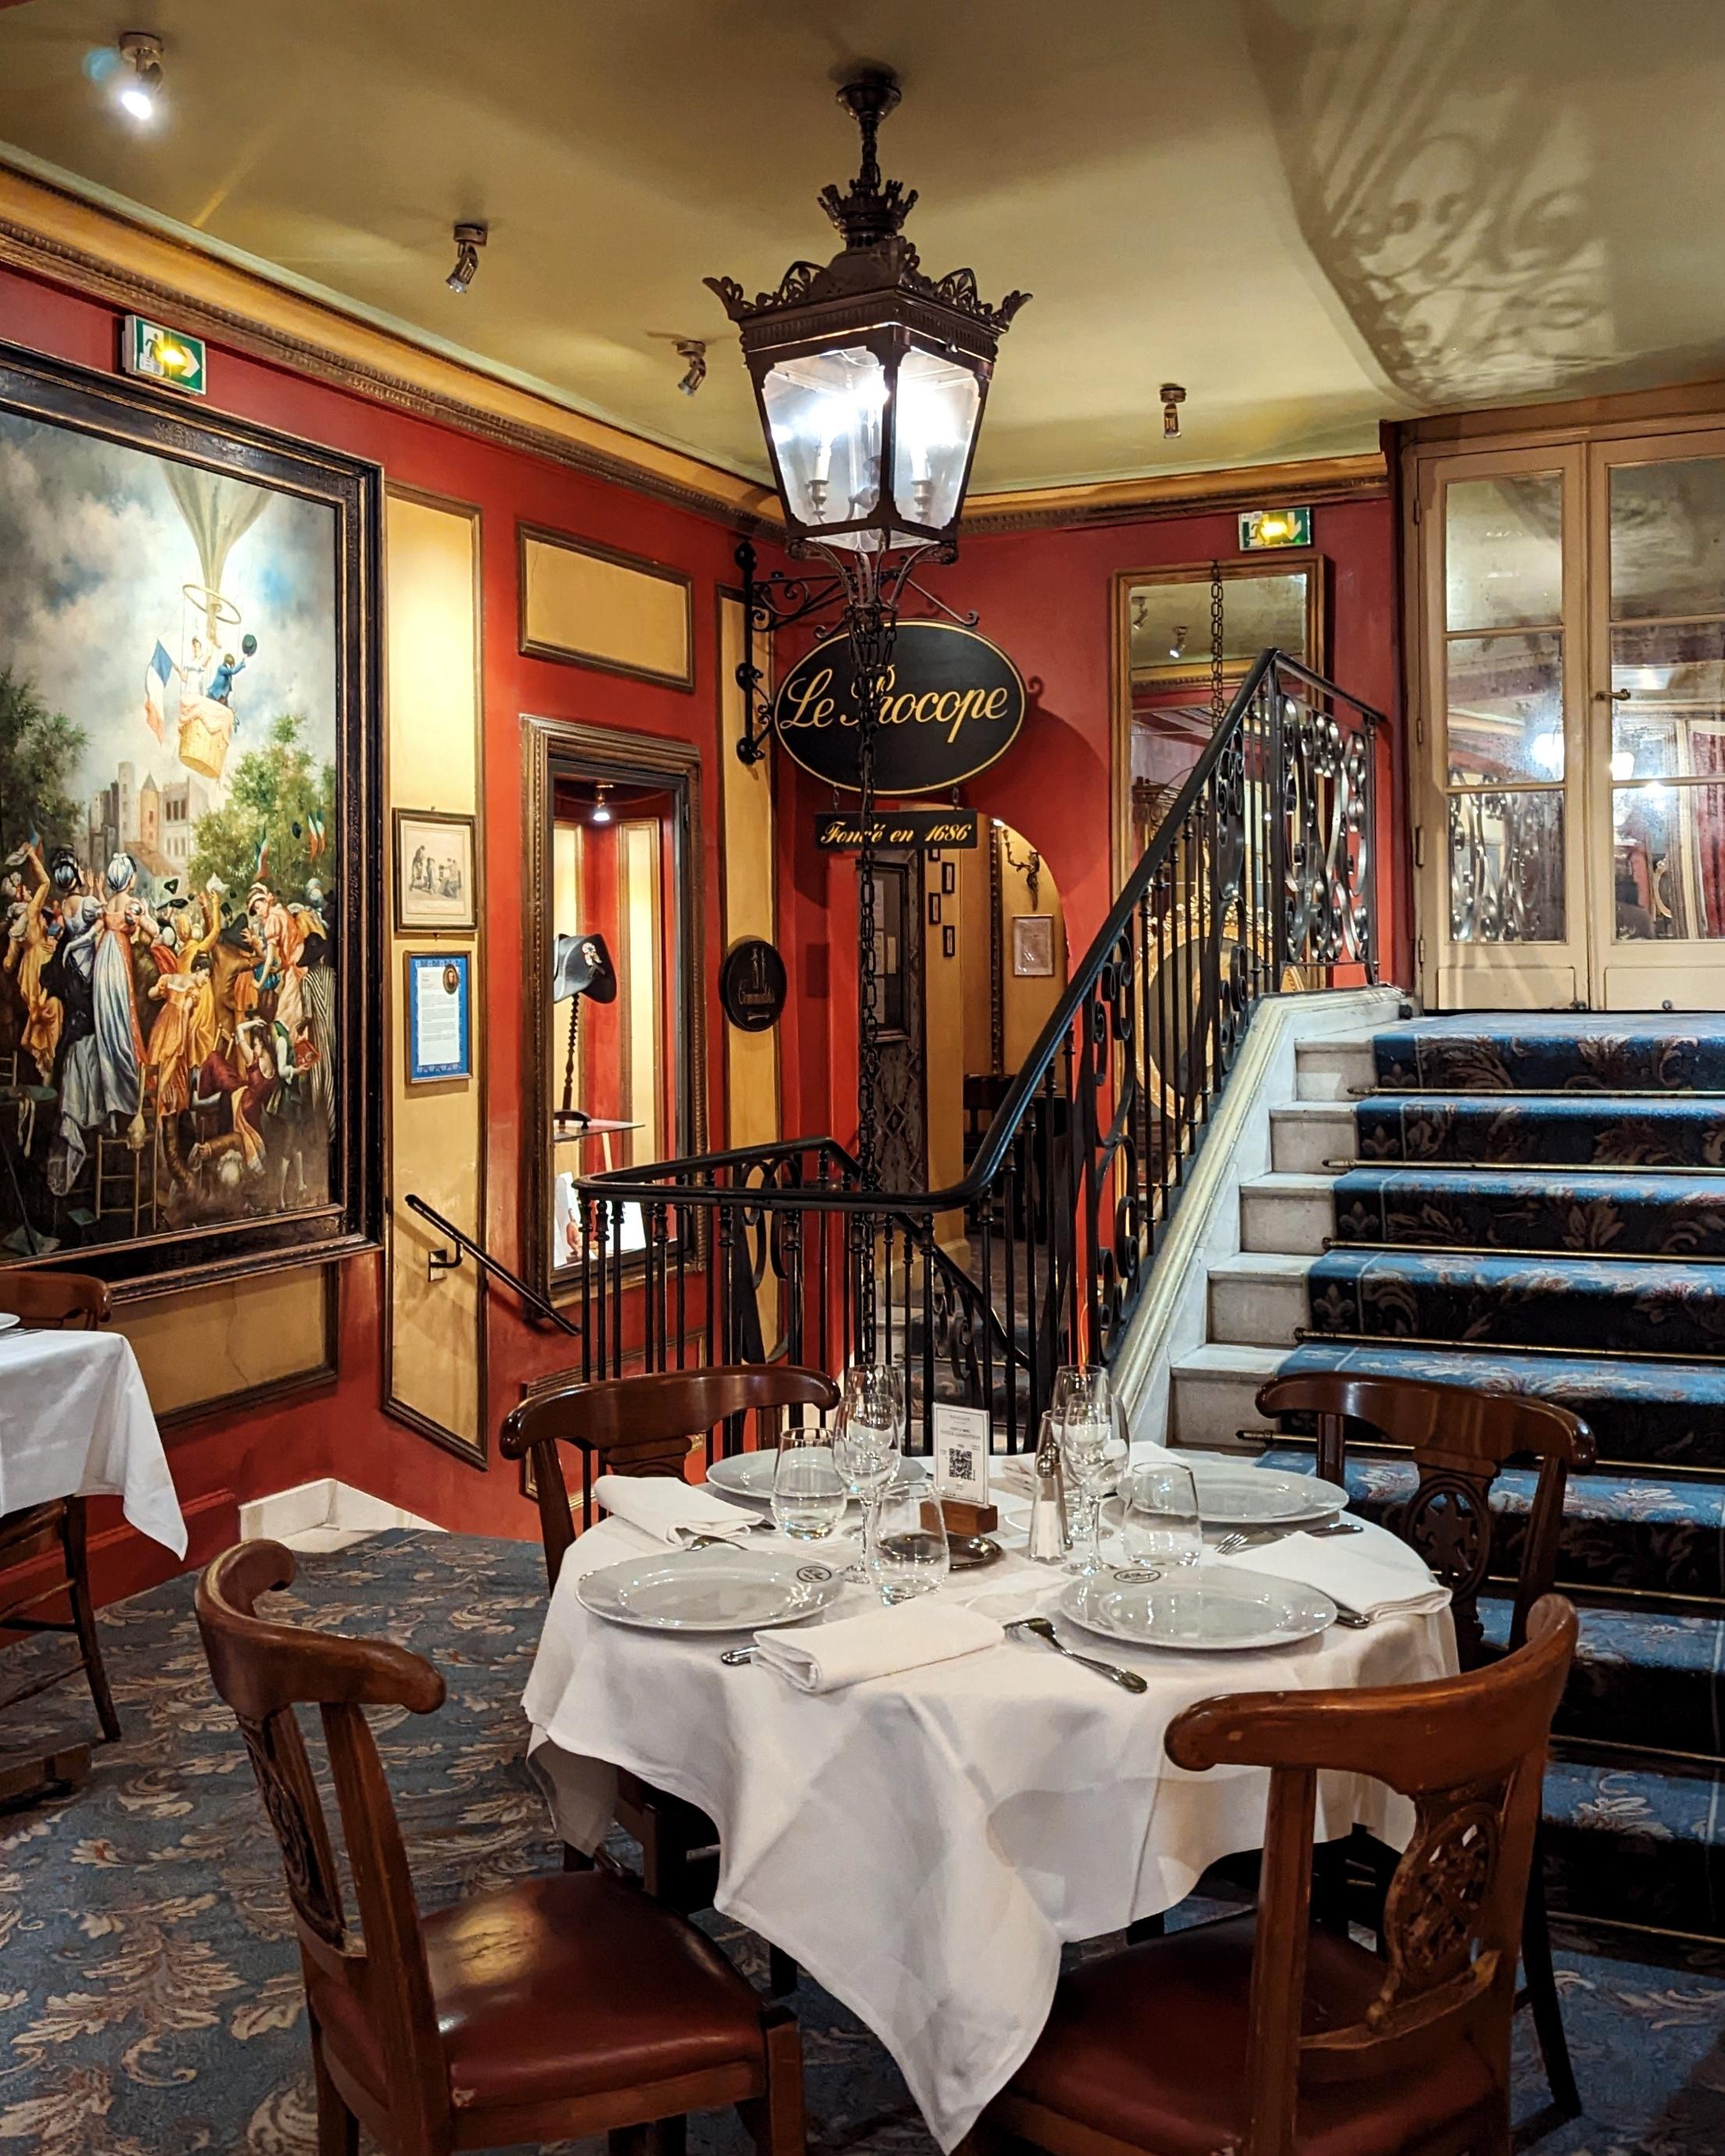 Enter the history: dine at the Procope !